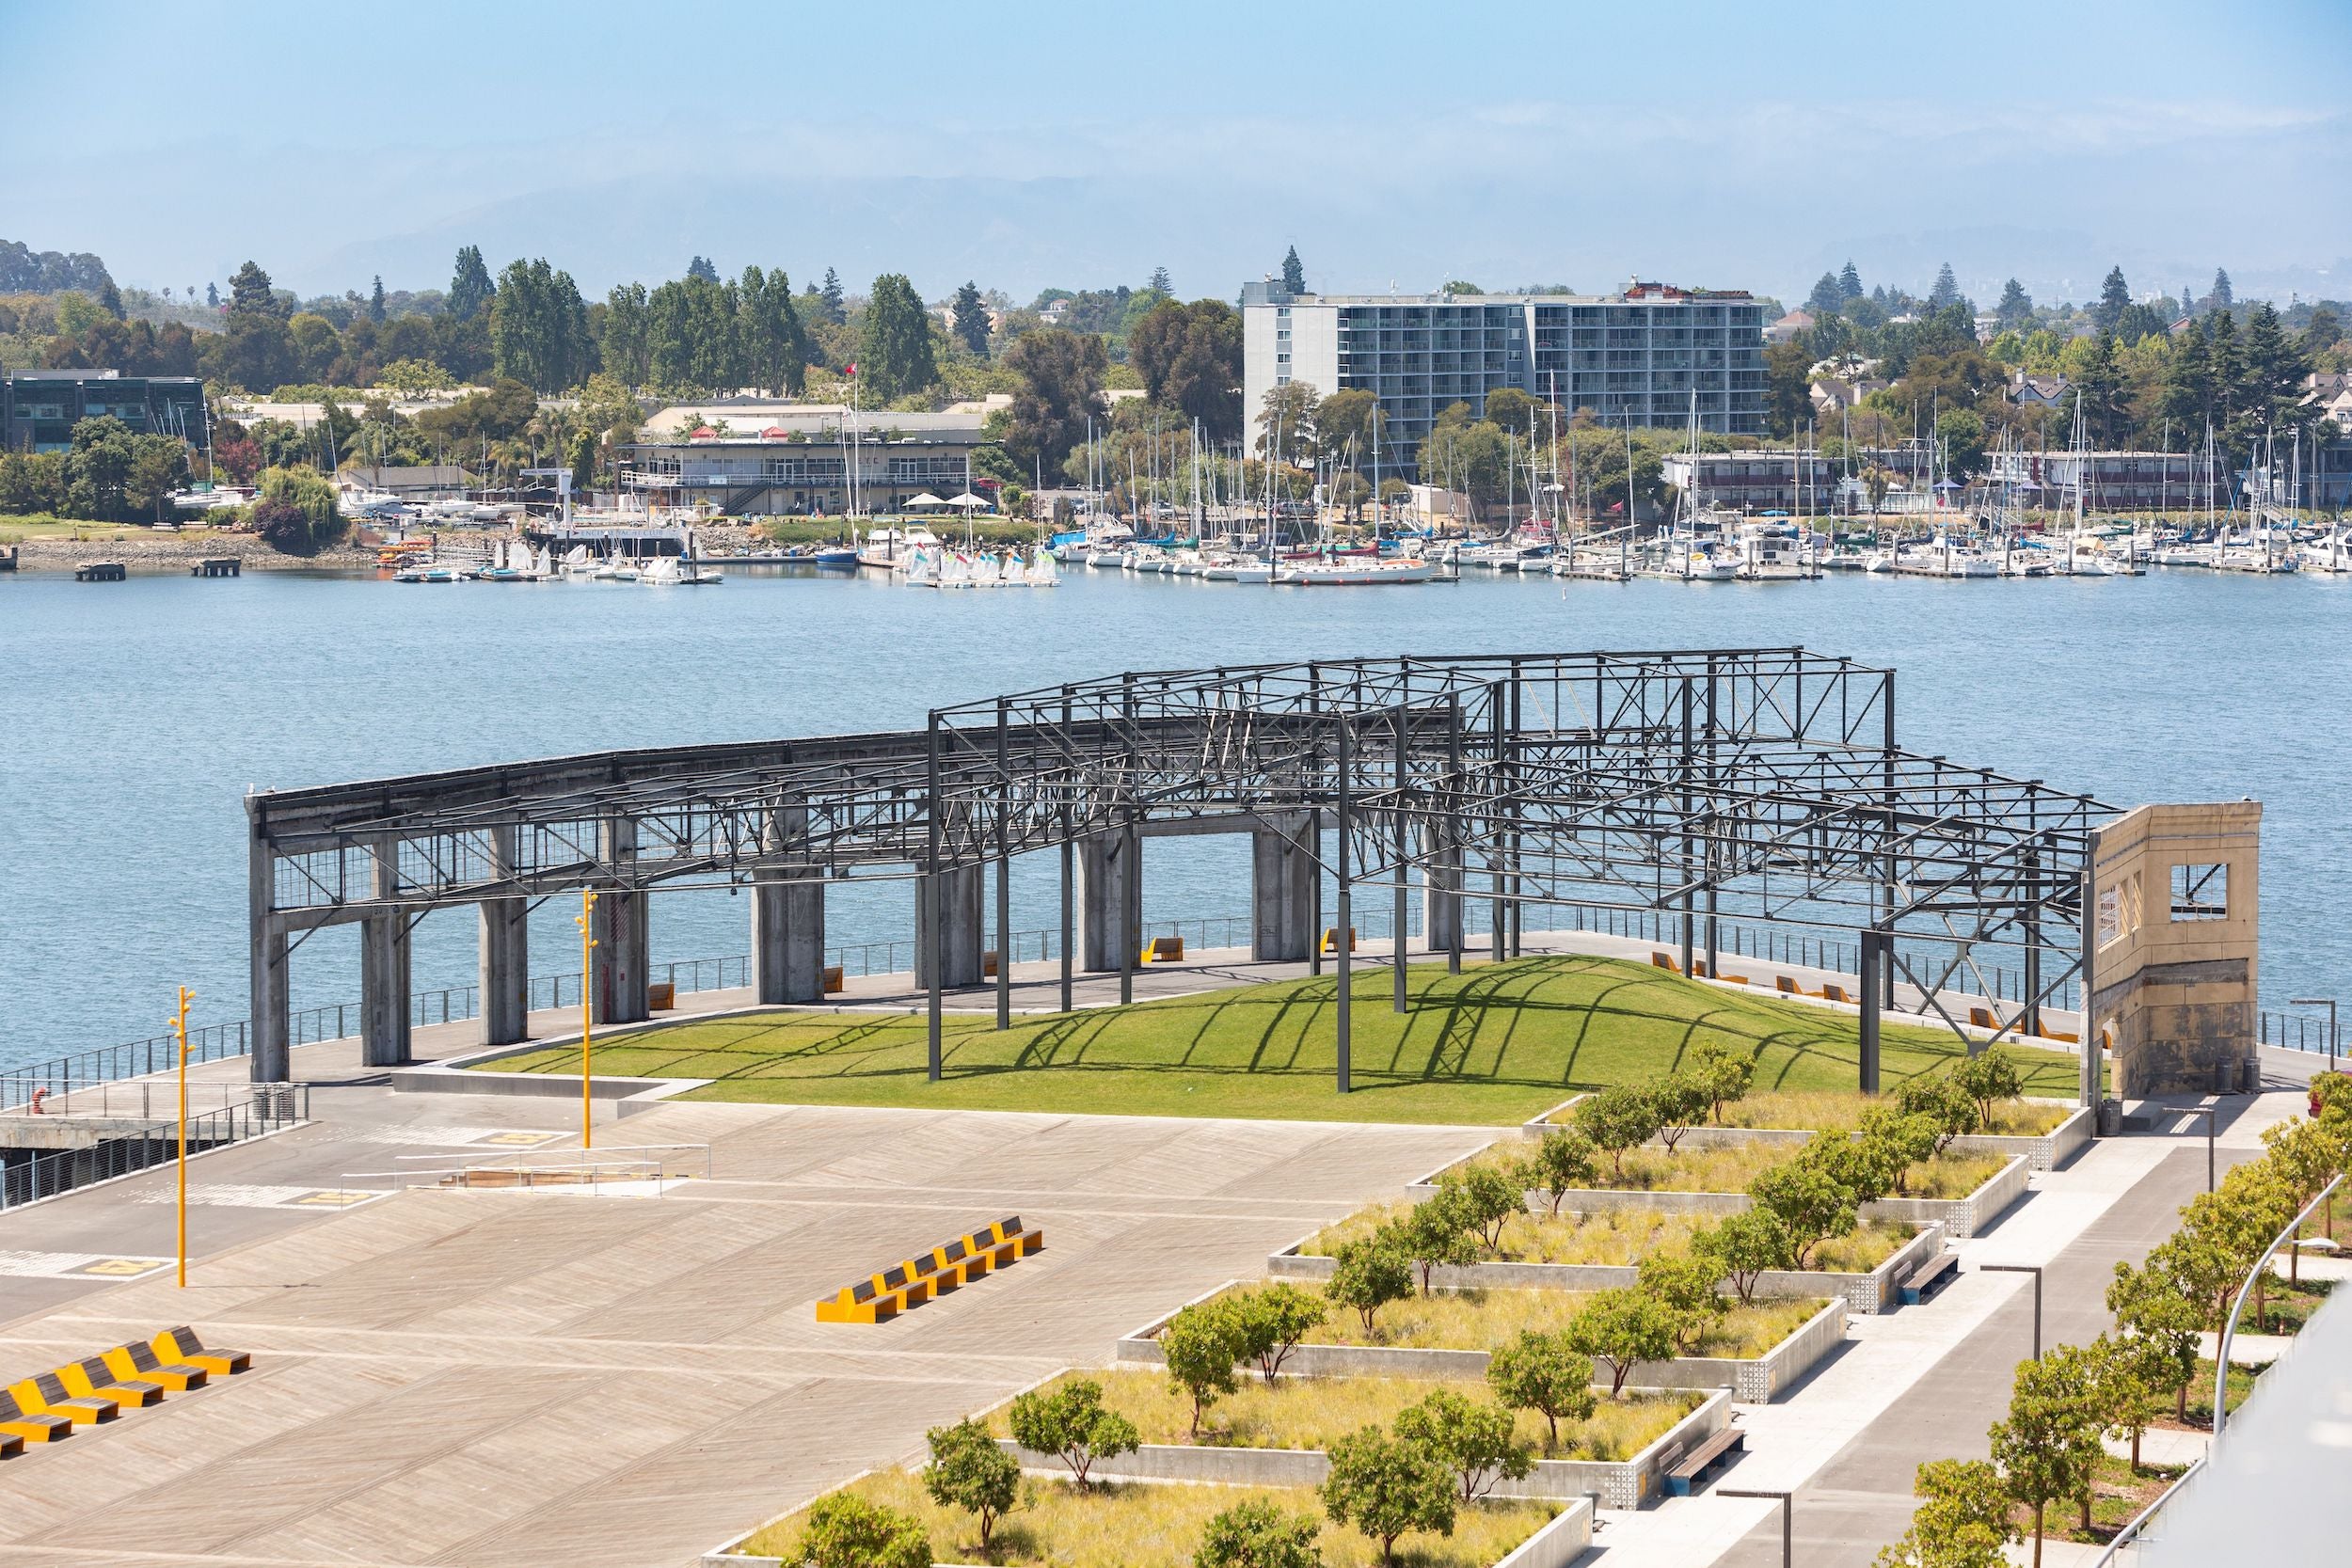 Drone image of Township Commons park, along the Oakland estuary. Metal structure is iconic.